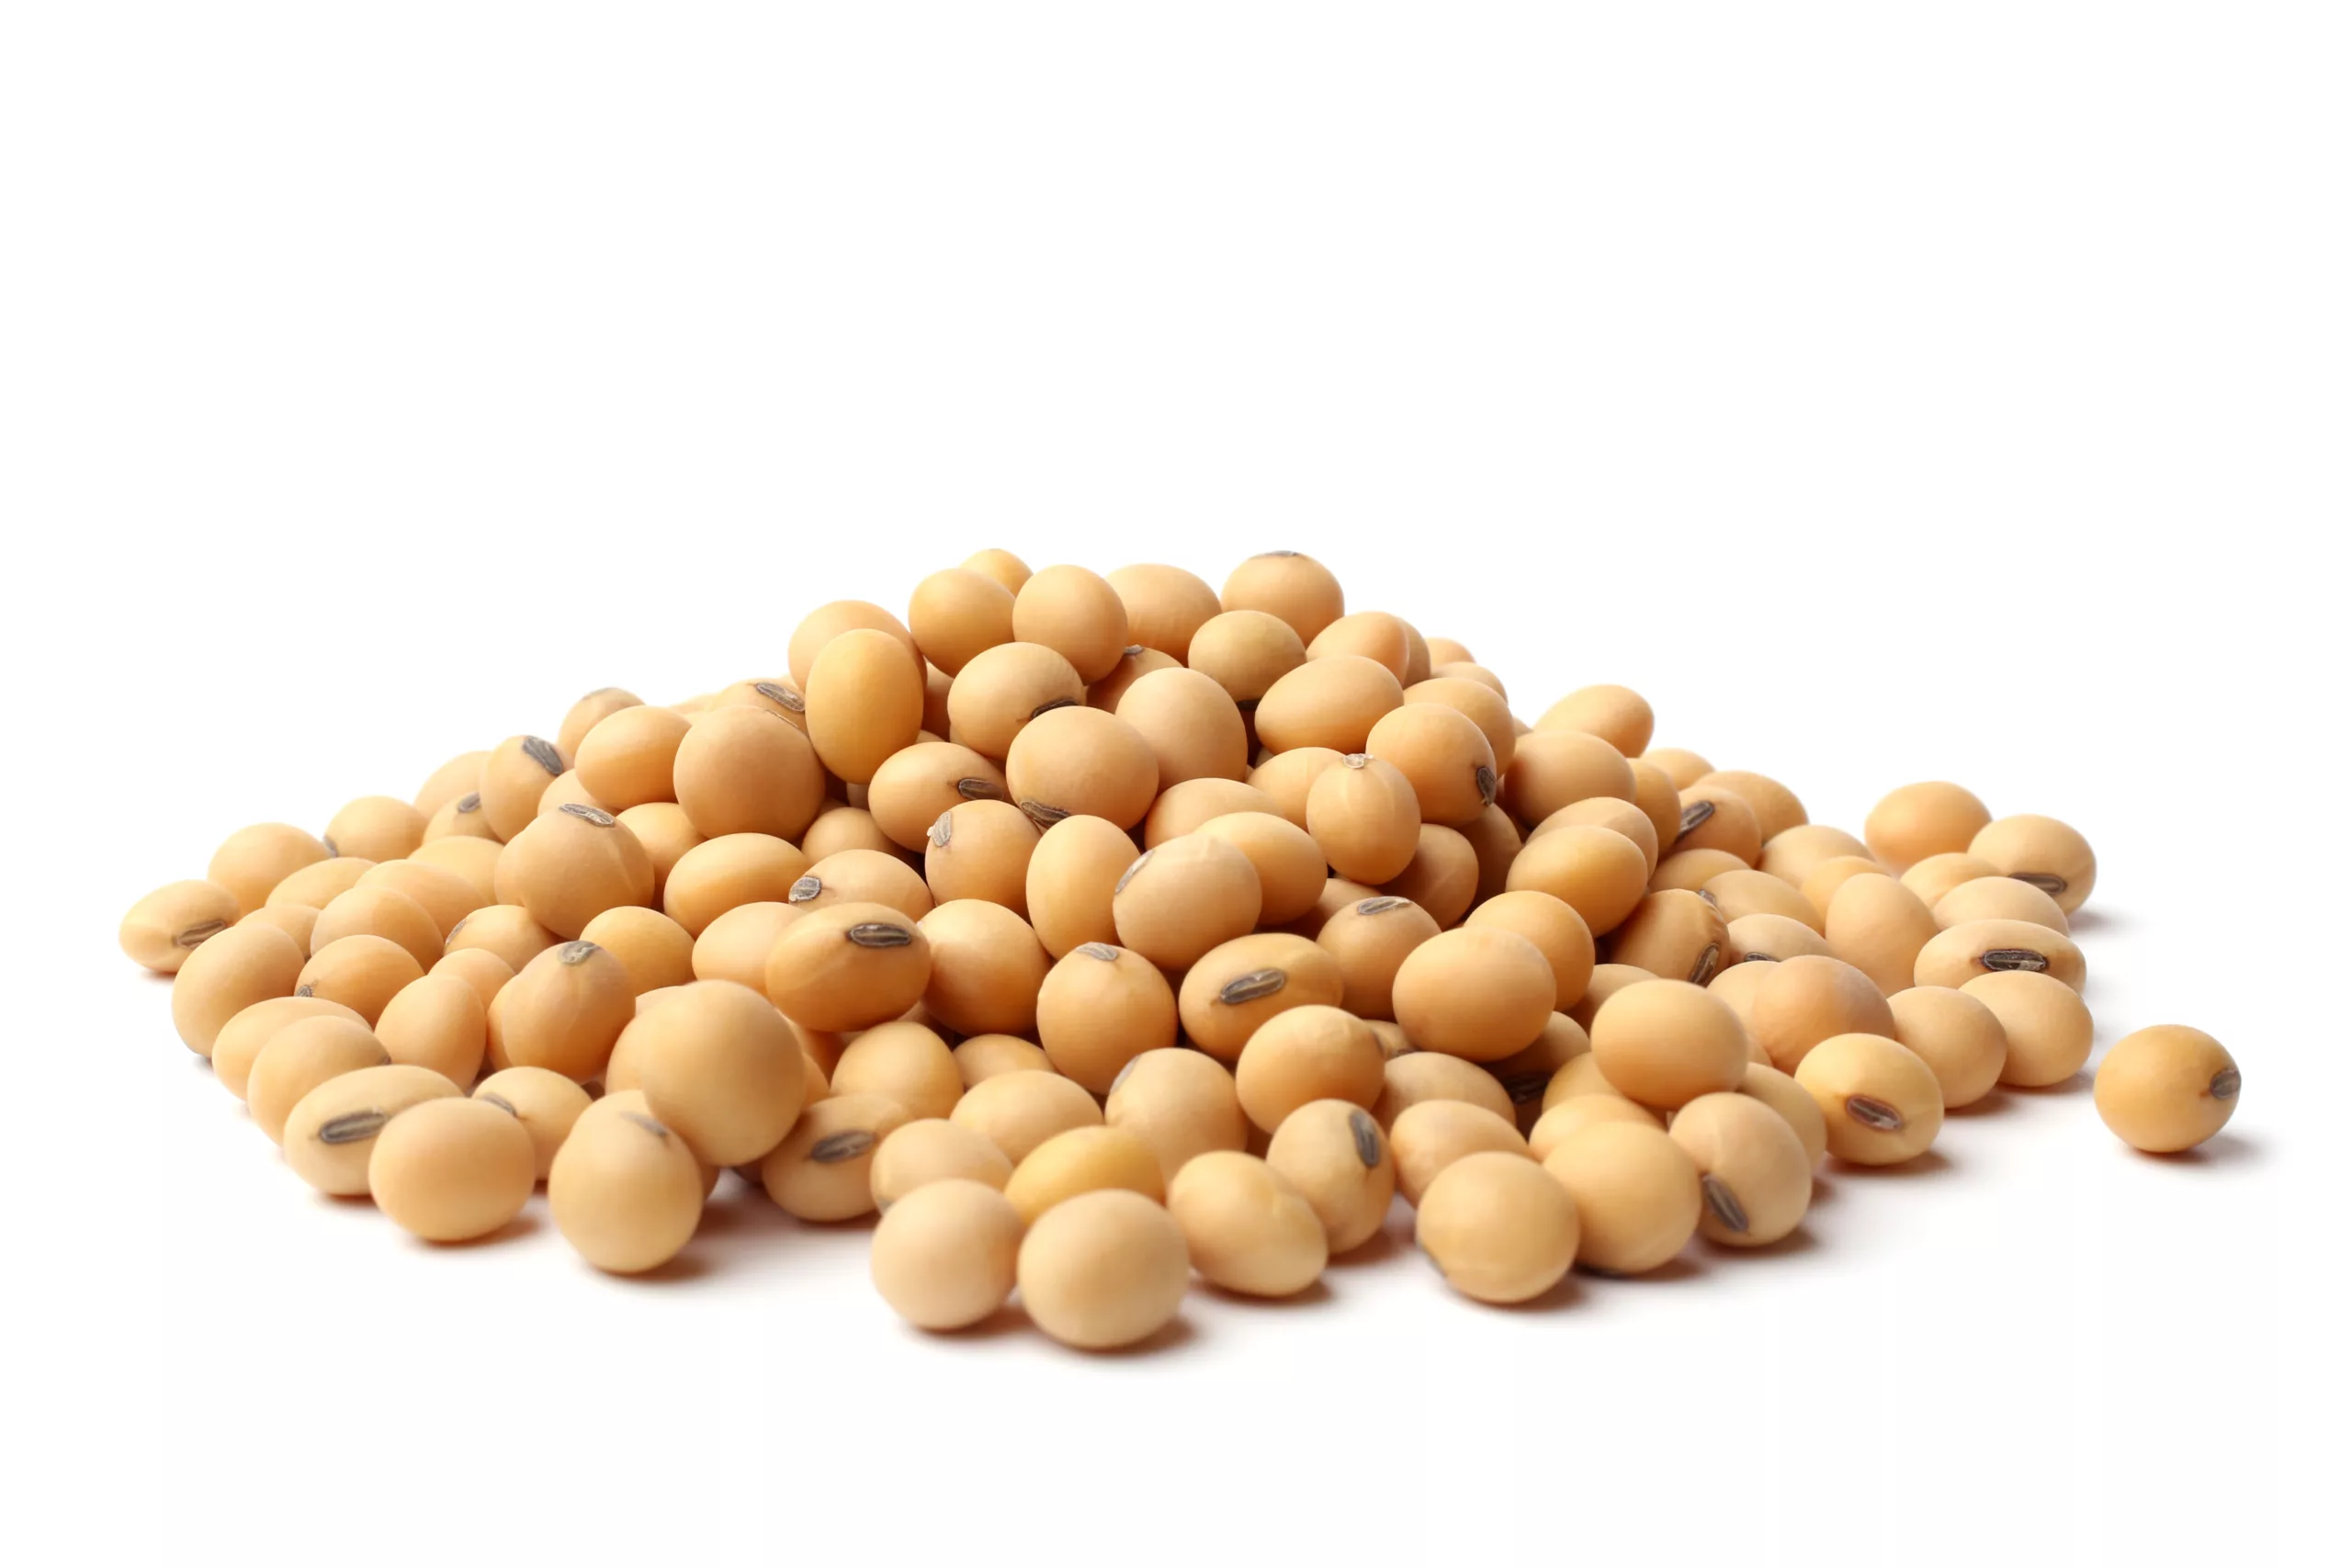 can dogs eat soy beans